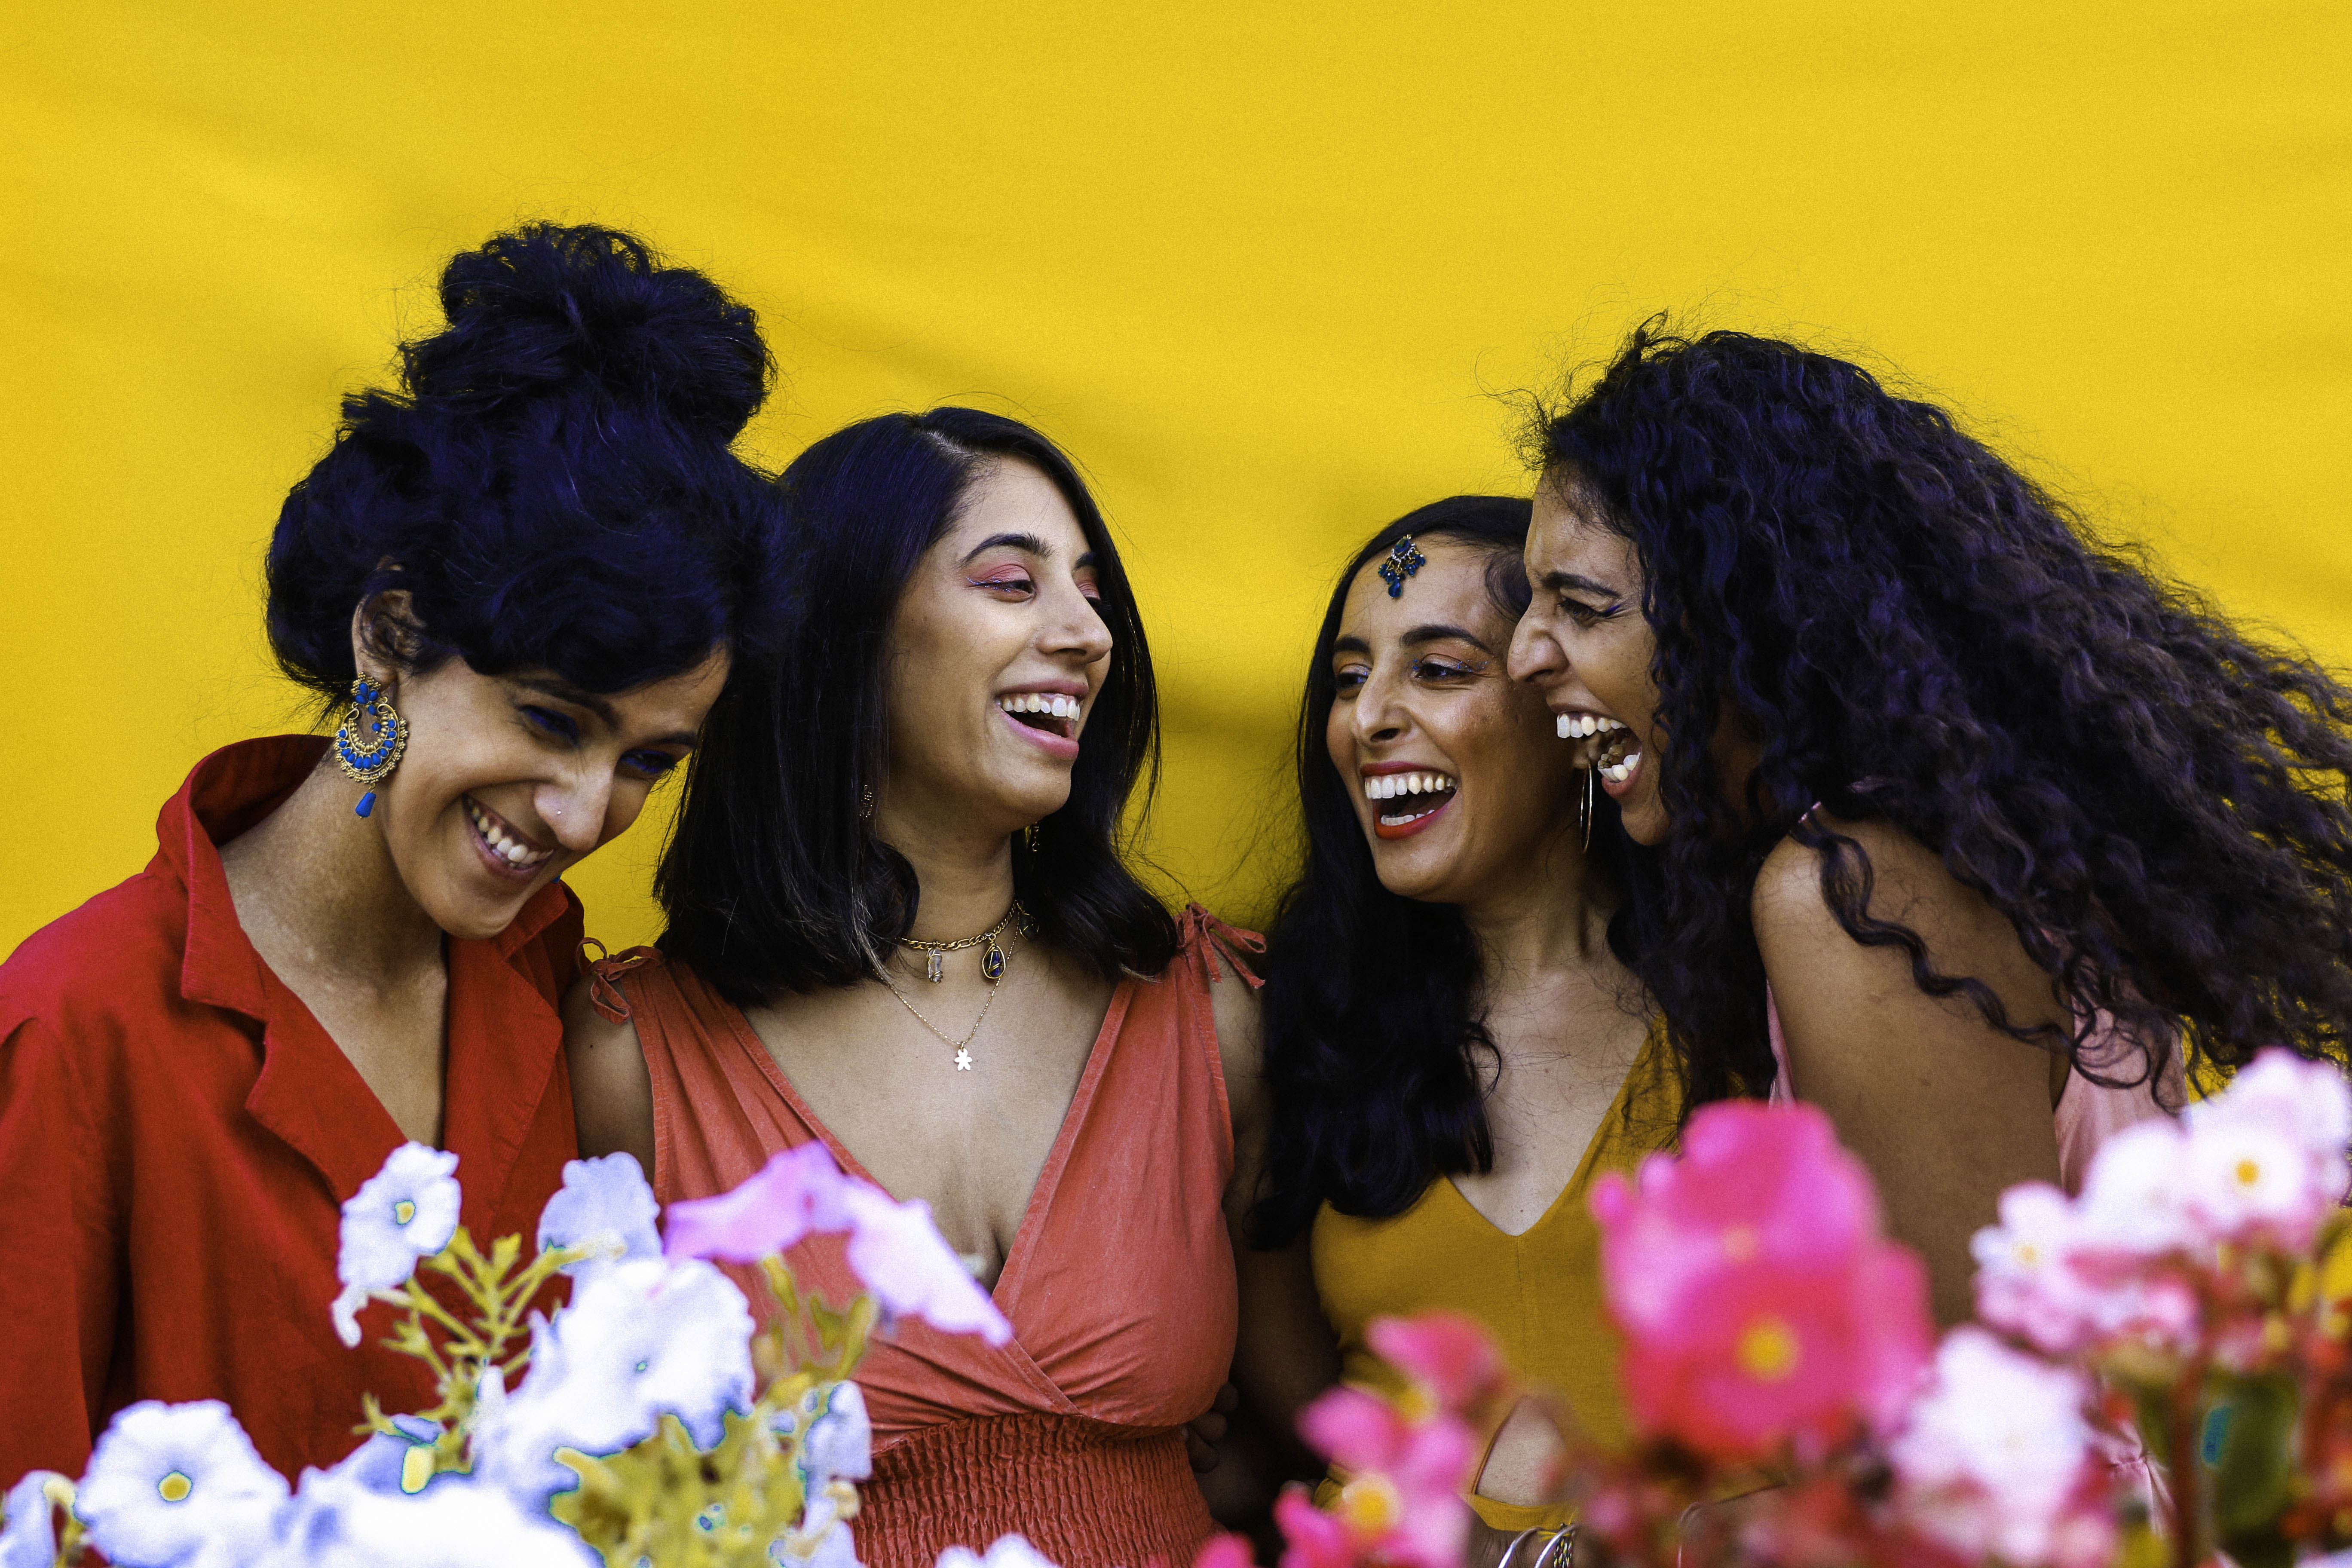 ‘Use that oppressive power as a liberator’ – meet poetry collective 4 BROWN GIRLS WHO WRITE